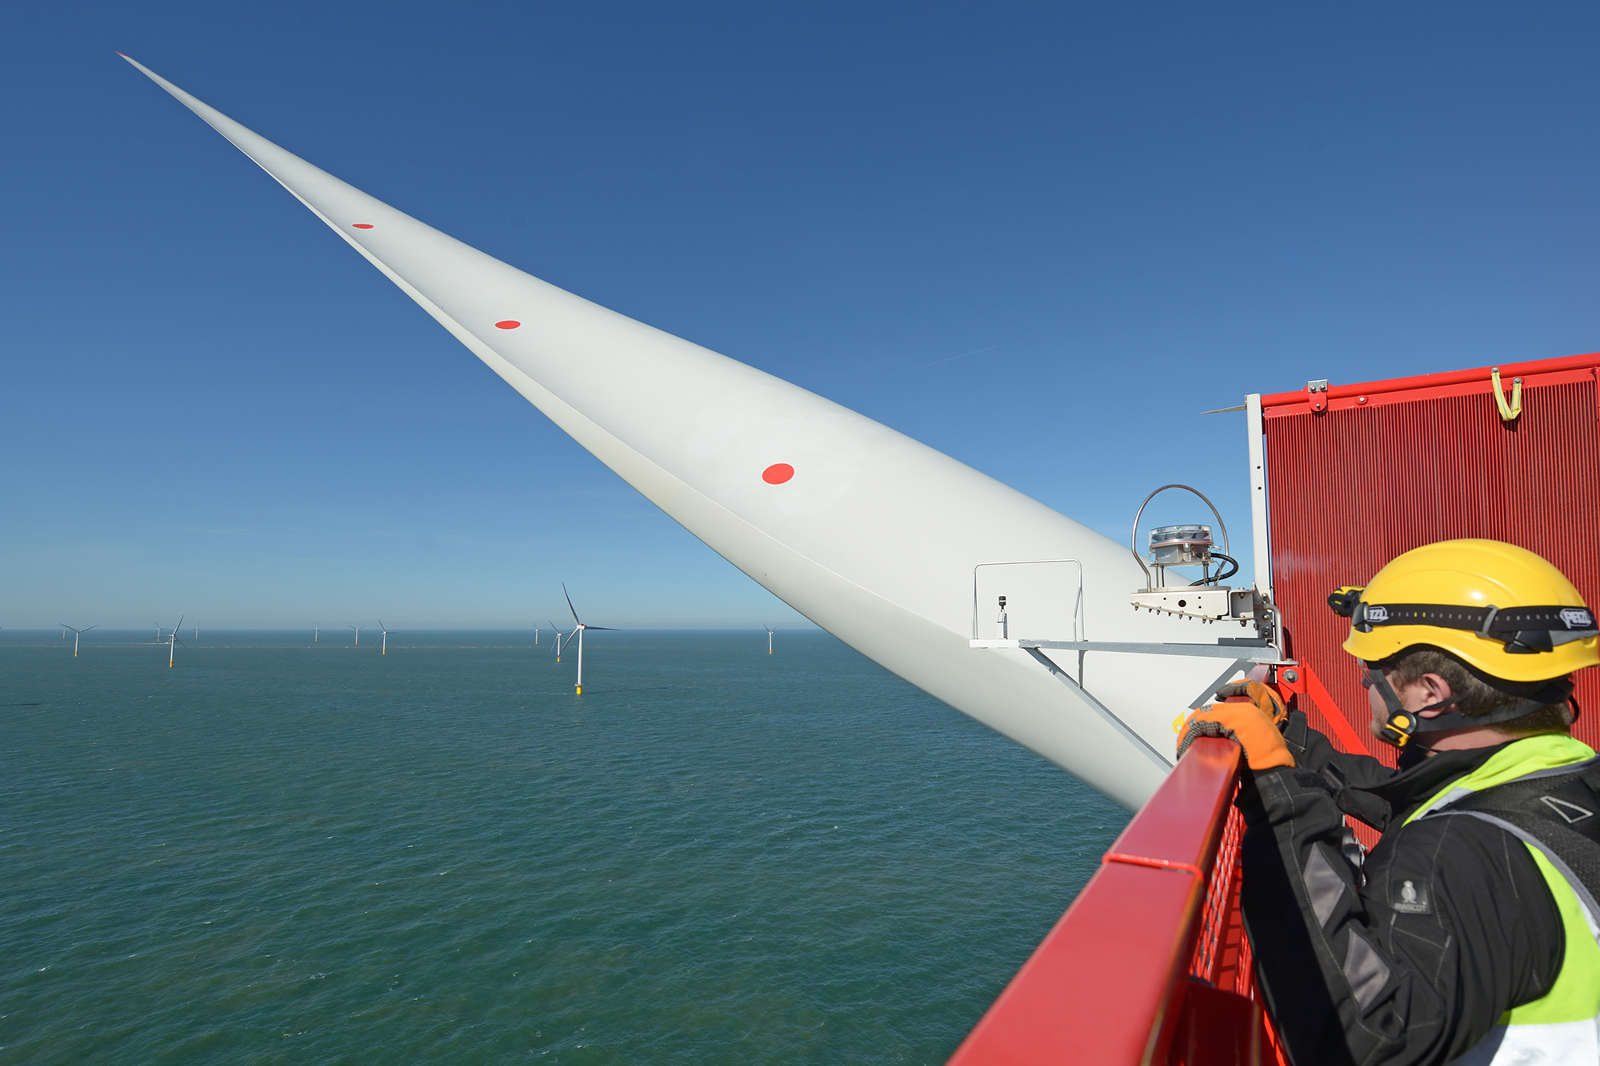 An offshore wind technician on top of a wind turbine at the UK's Galloper offshore wind farm